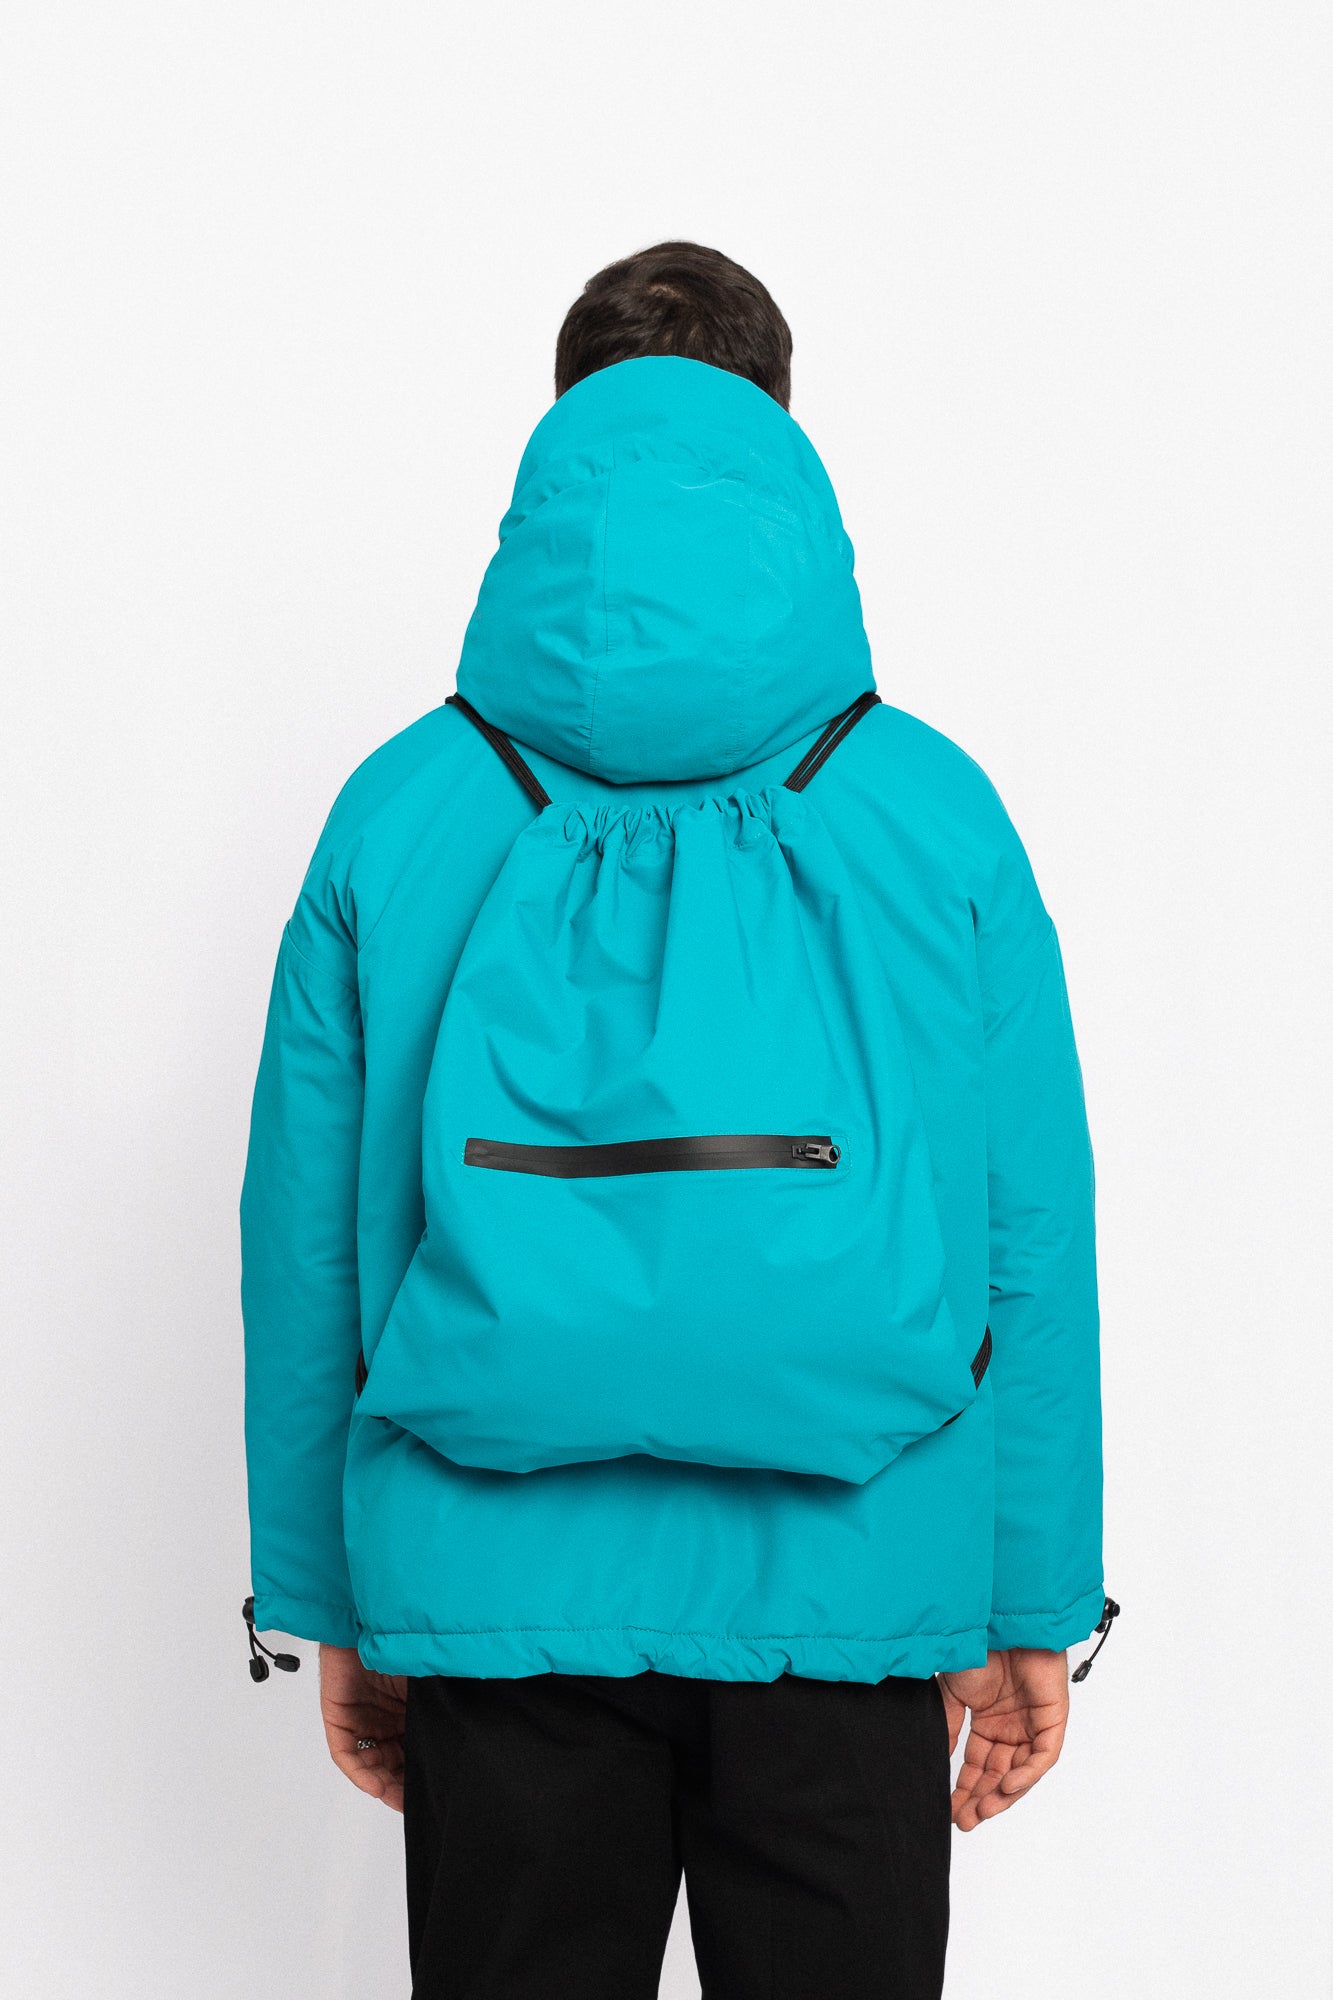 Backpack - Turquoise